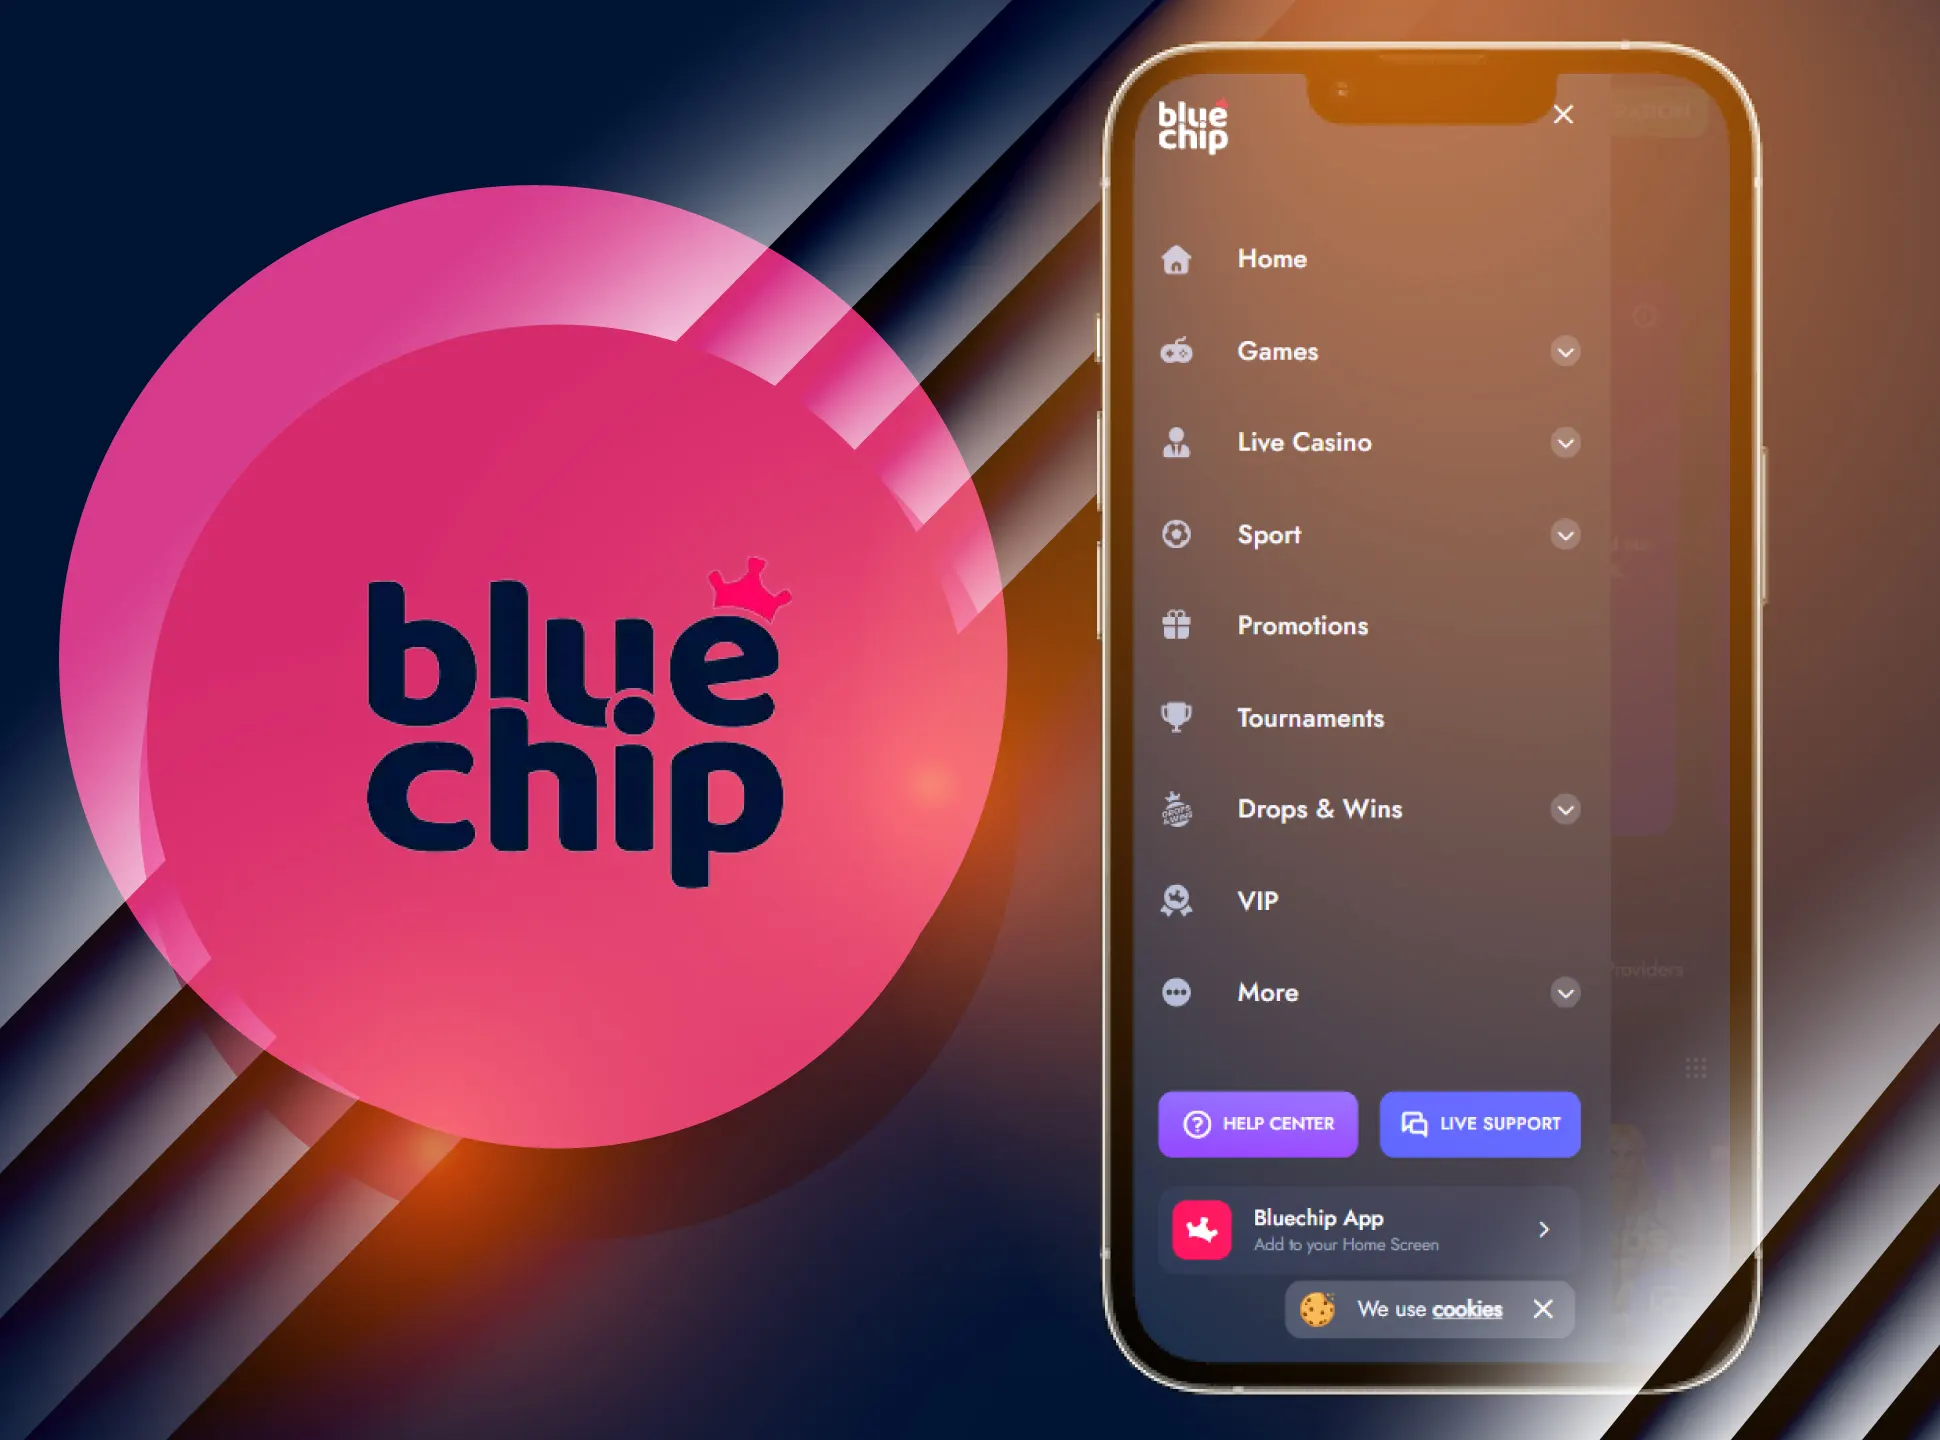 Learn more about the BlueChip mobile version and the application.